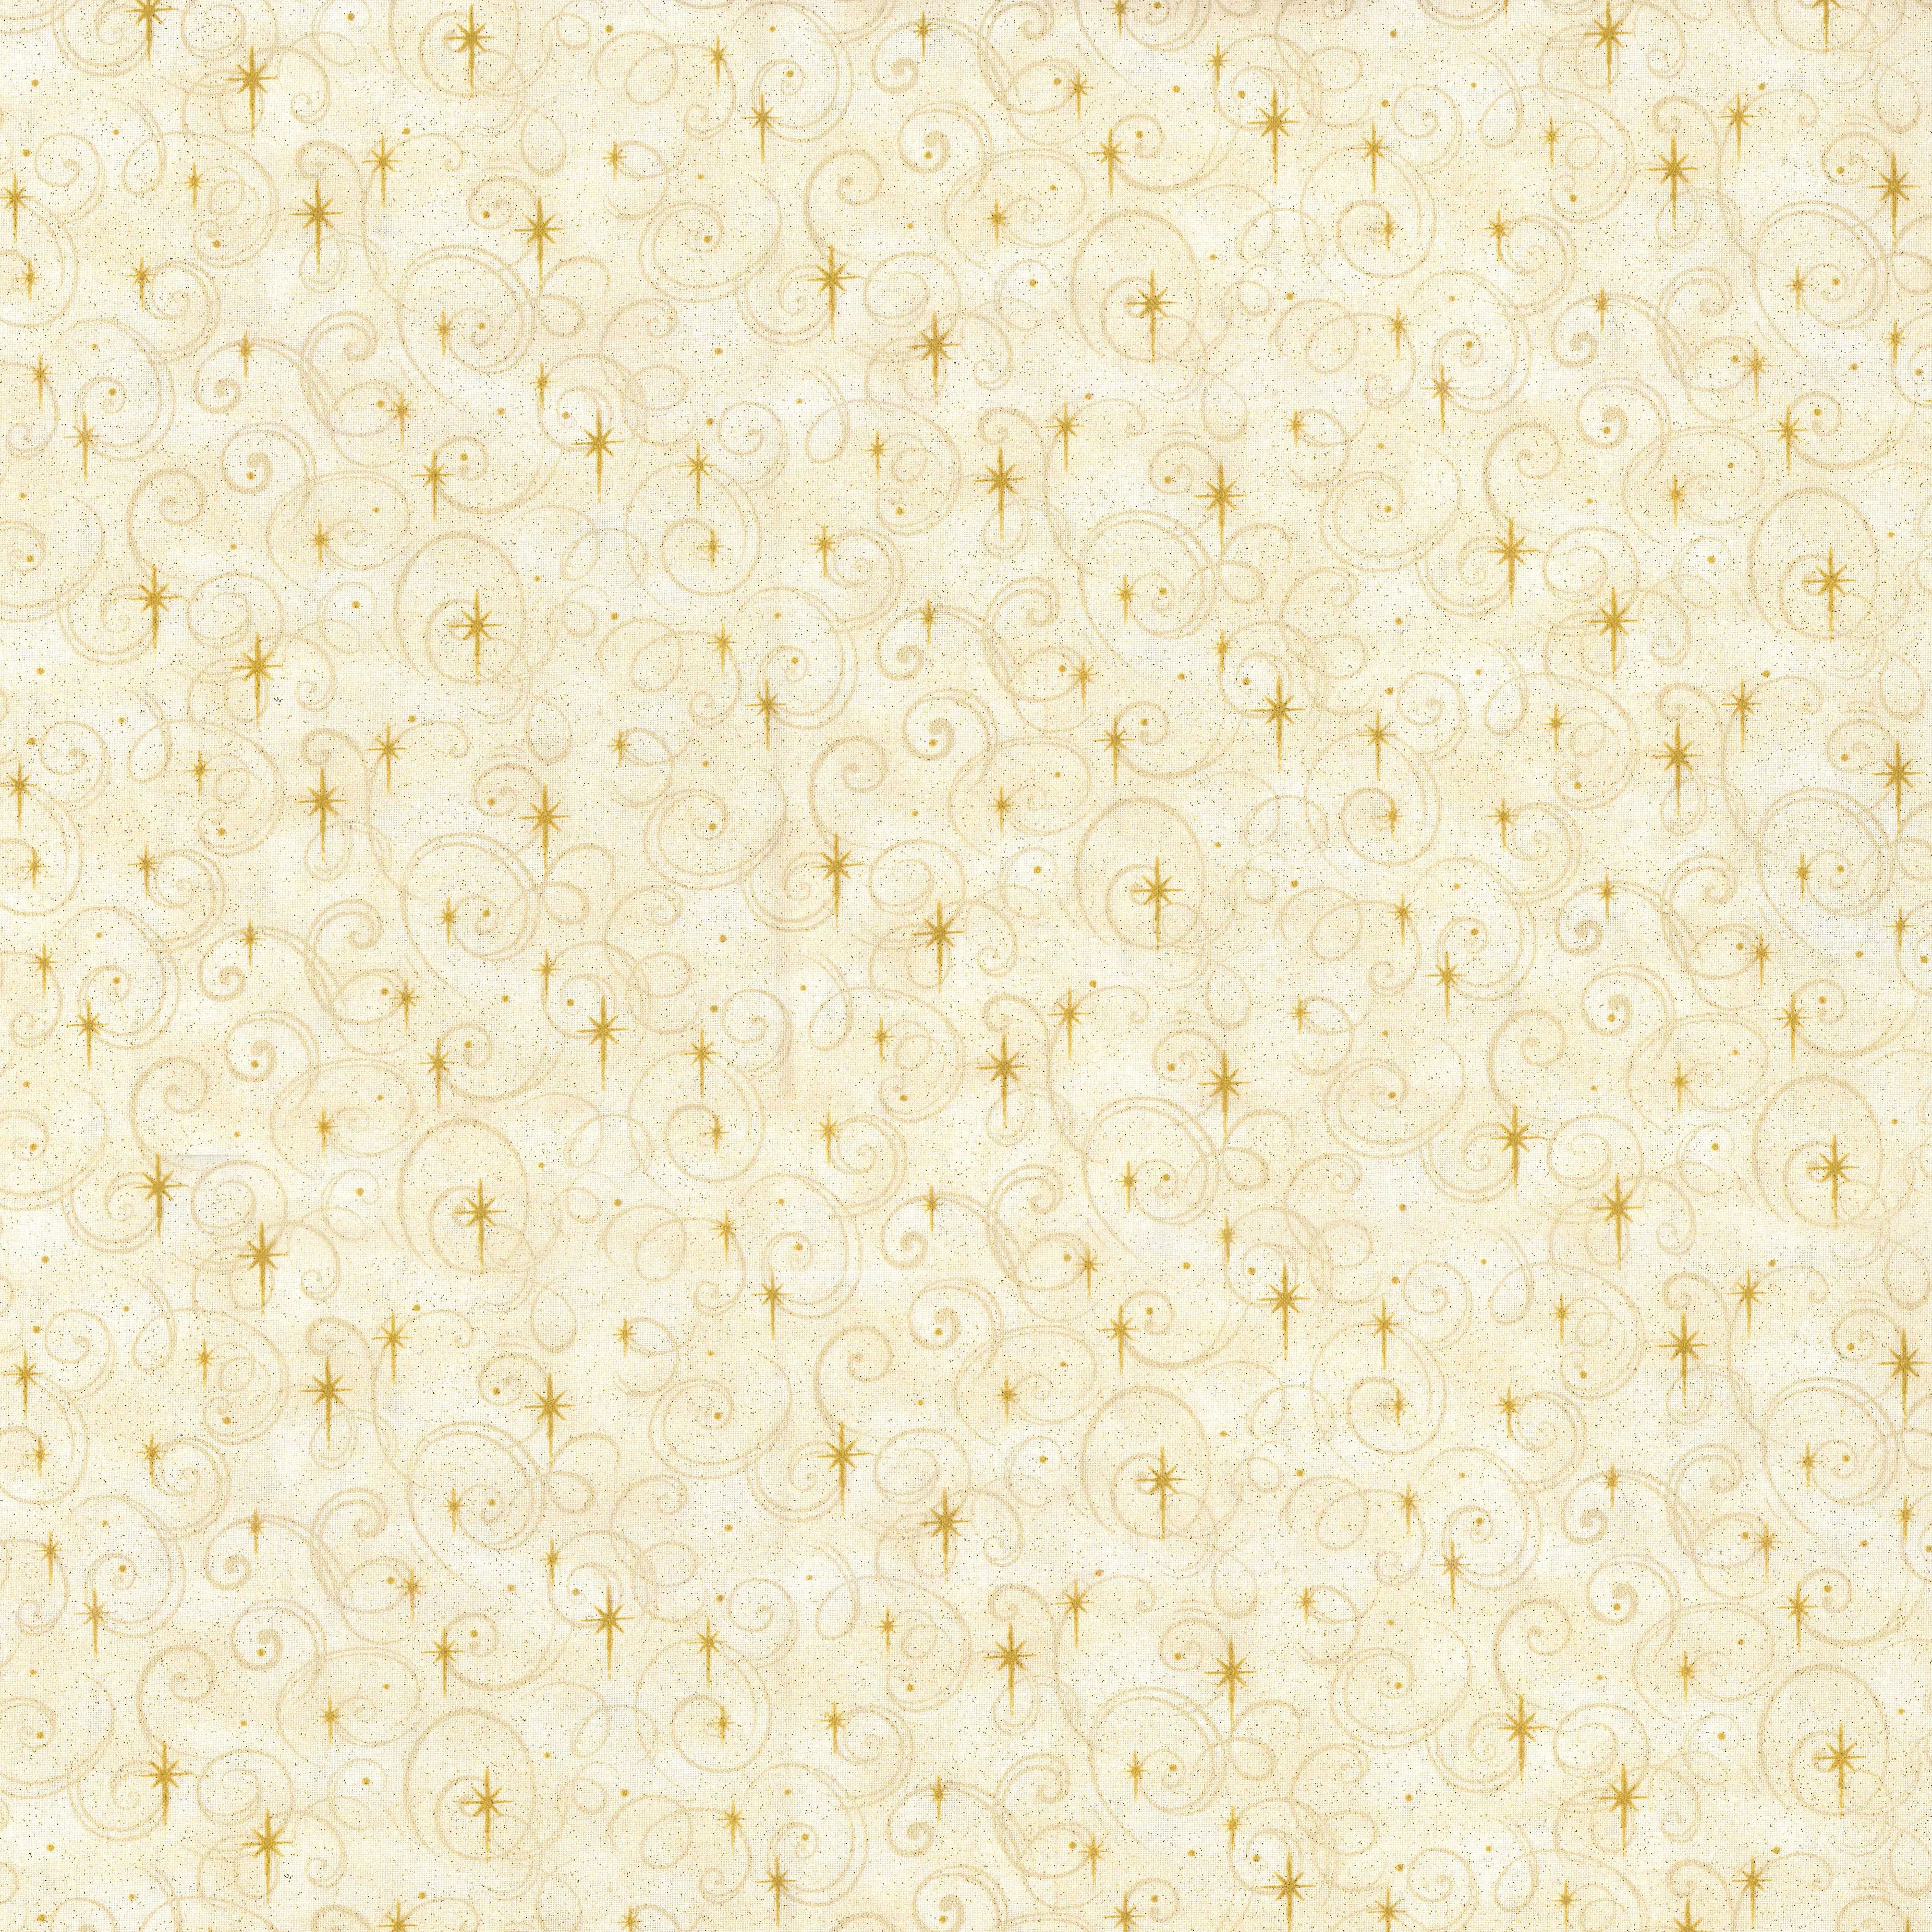 Fabric Traditions Gold Stars Cotton Fabric